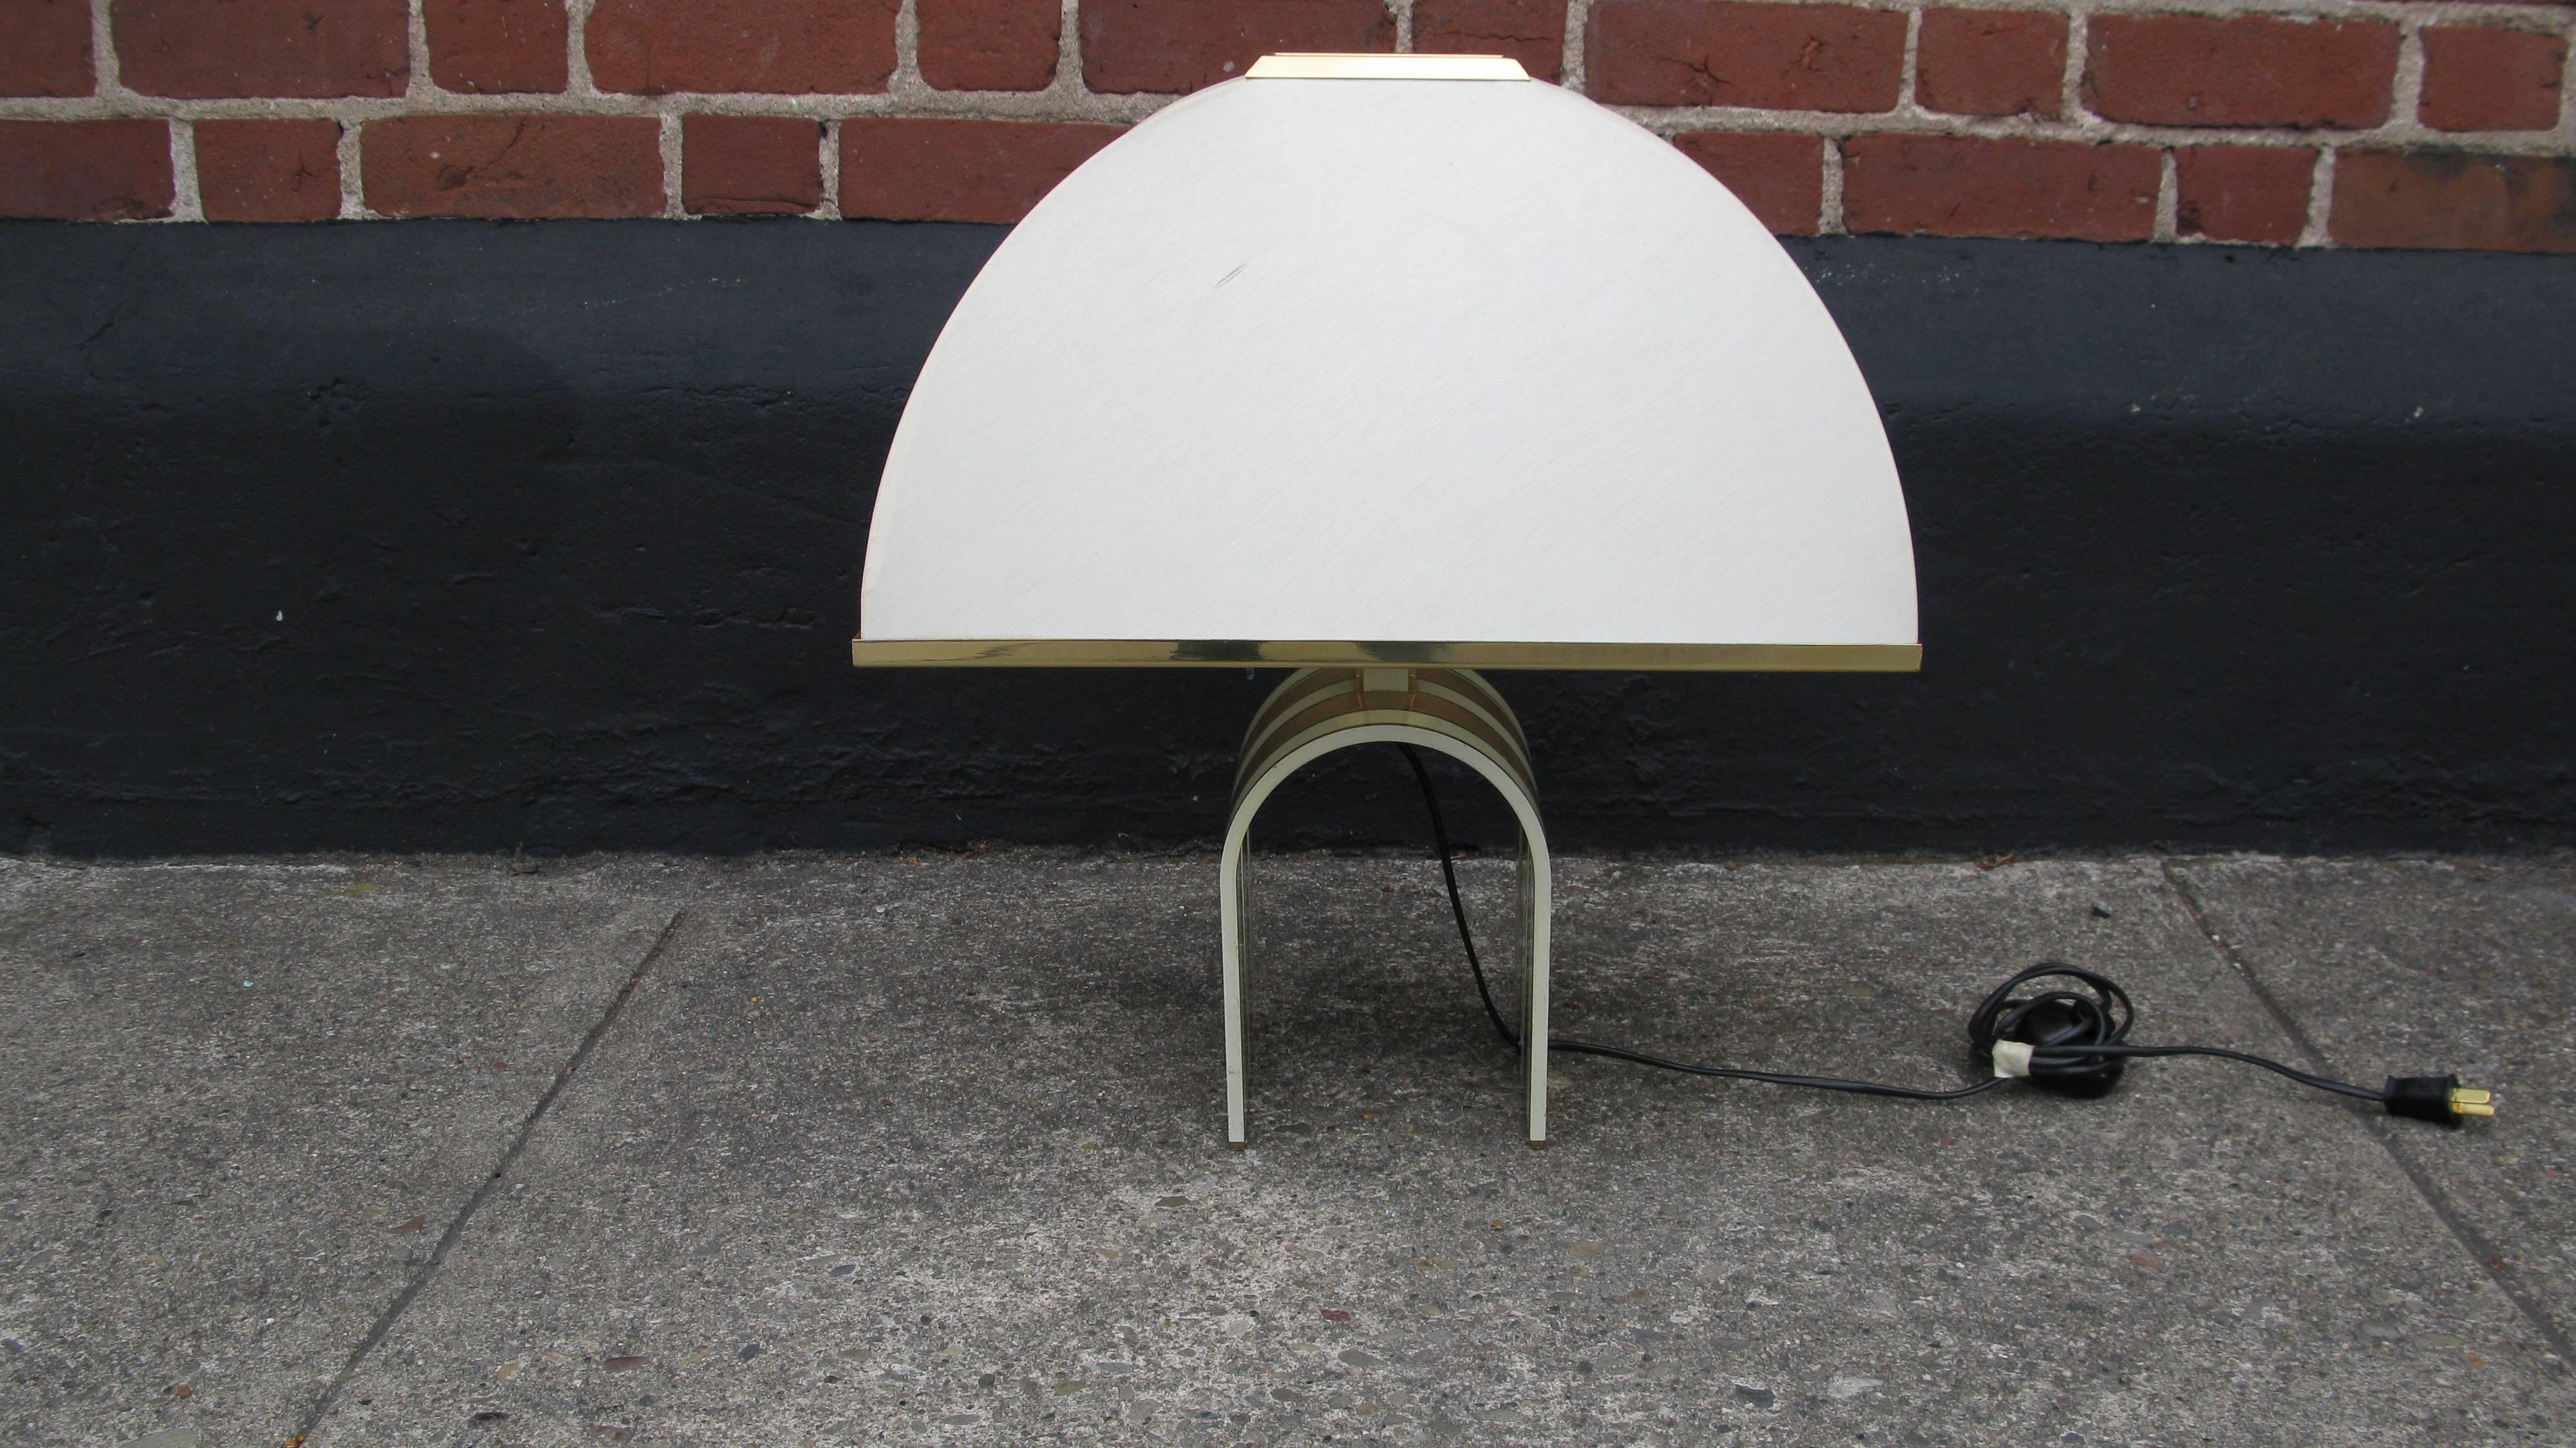 Whimsical table lamp in brass. White and brass arc design are unique and modern. Curved shade adds to the curved design. Vintage shade that has some minor wear.

Measures: 6.25